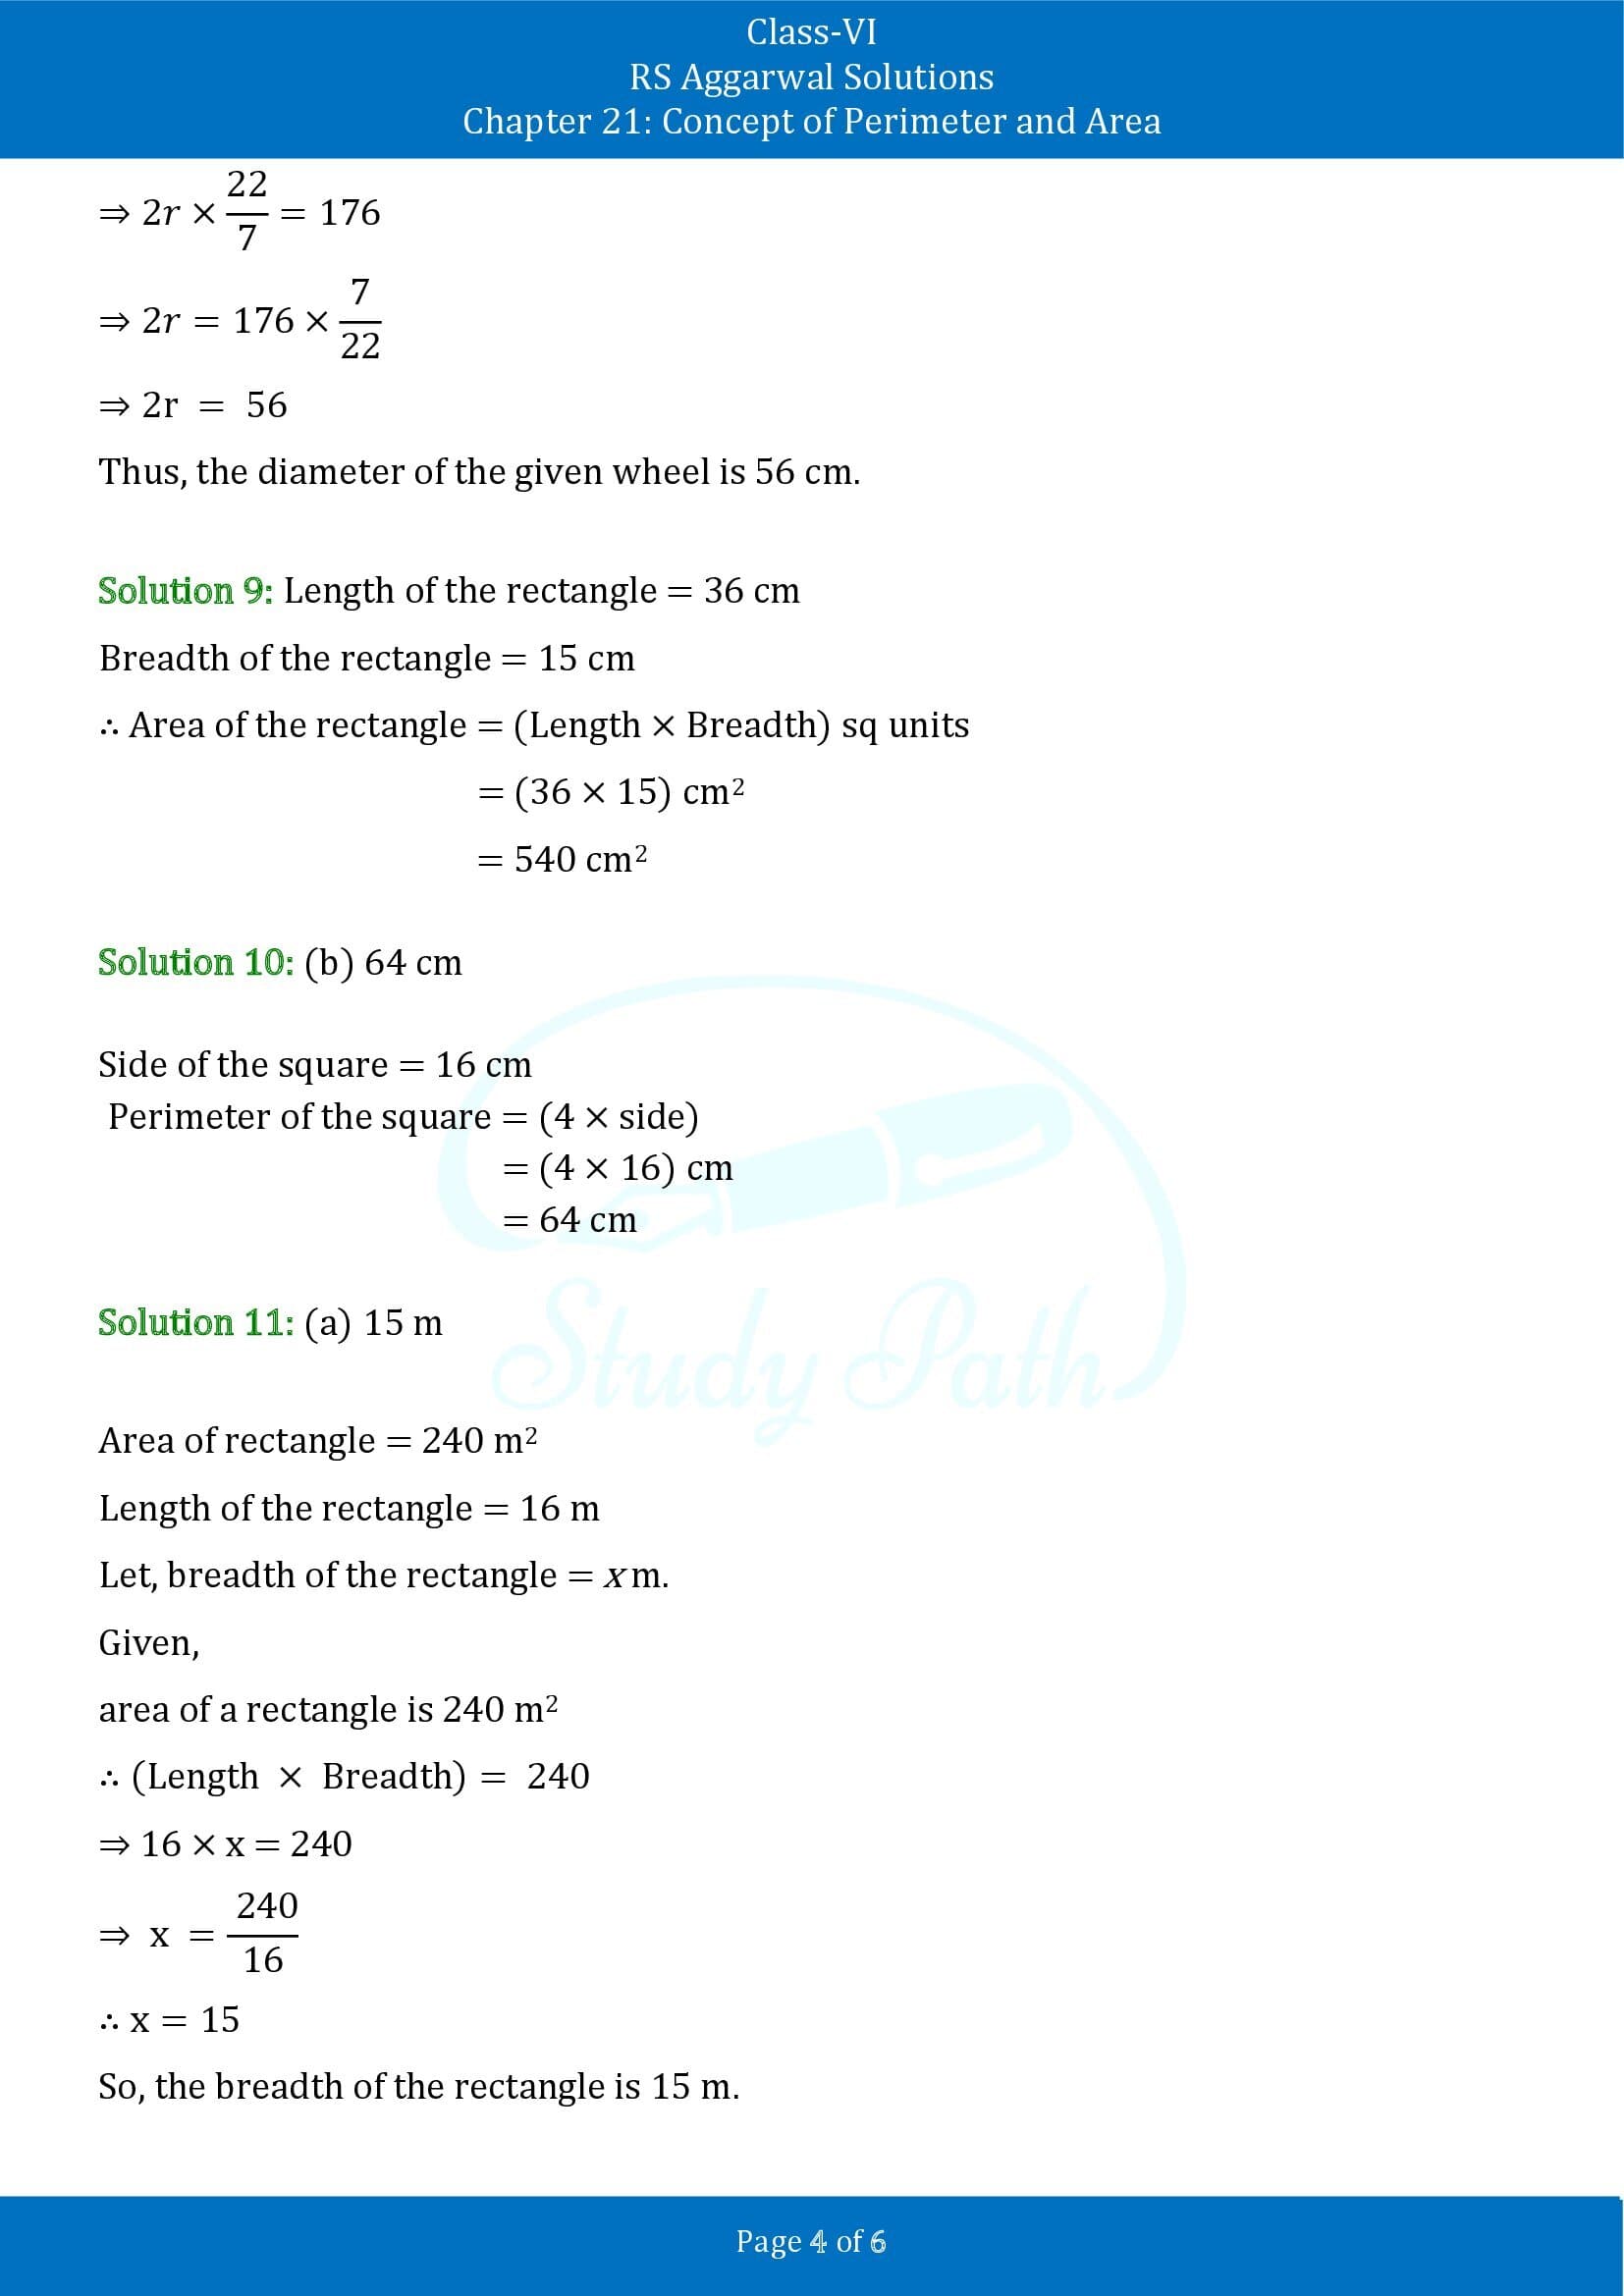 RS Aggarwal Solutions Class 6 Chapter 21 Concept of Perimeter and Area Test Paper 00004